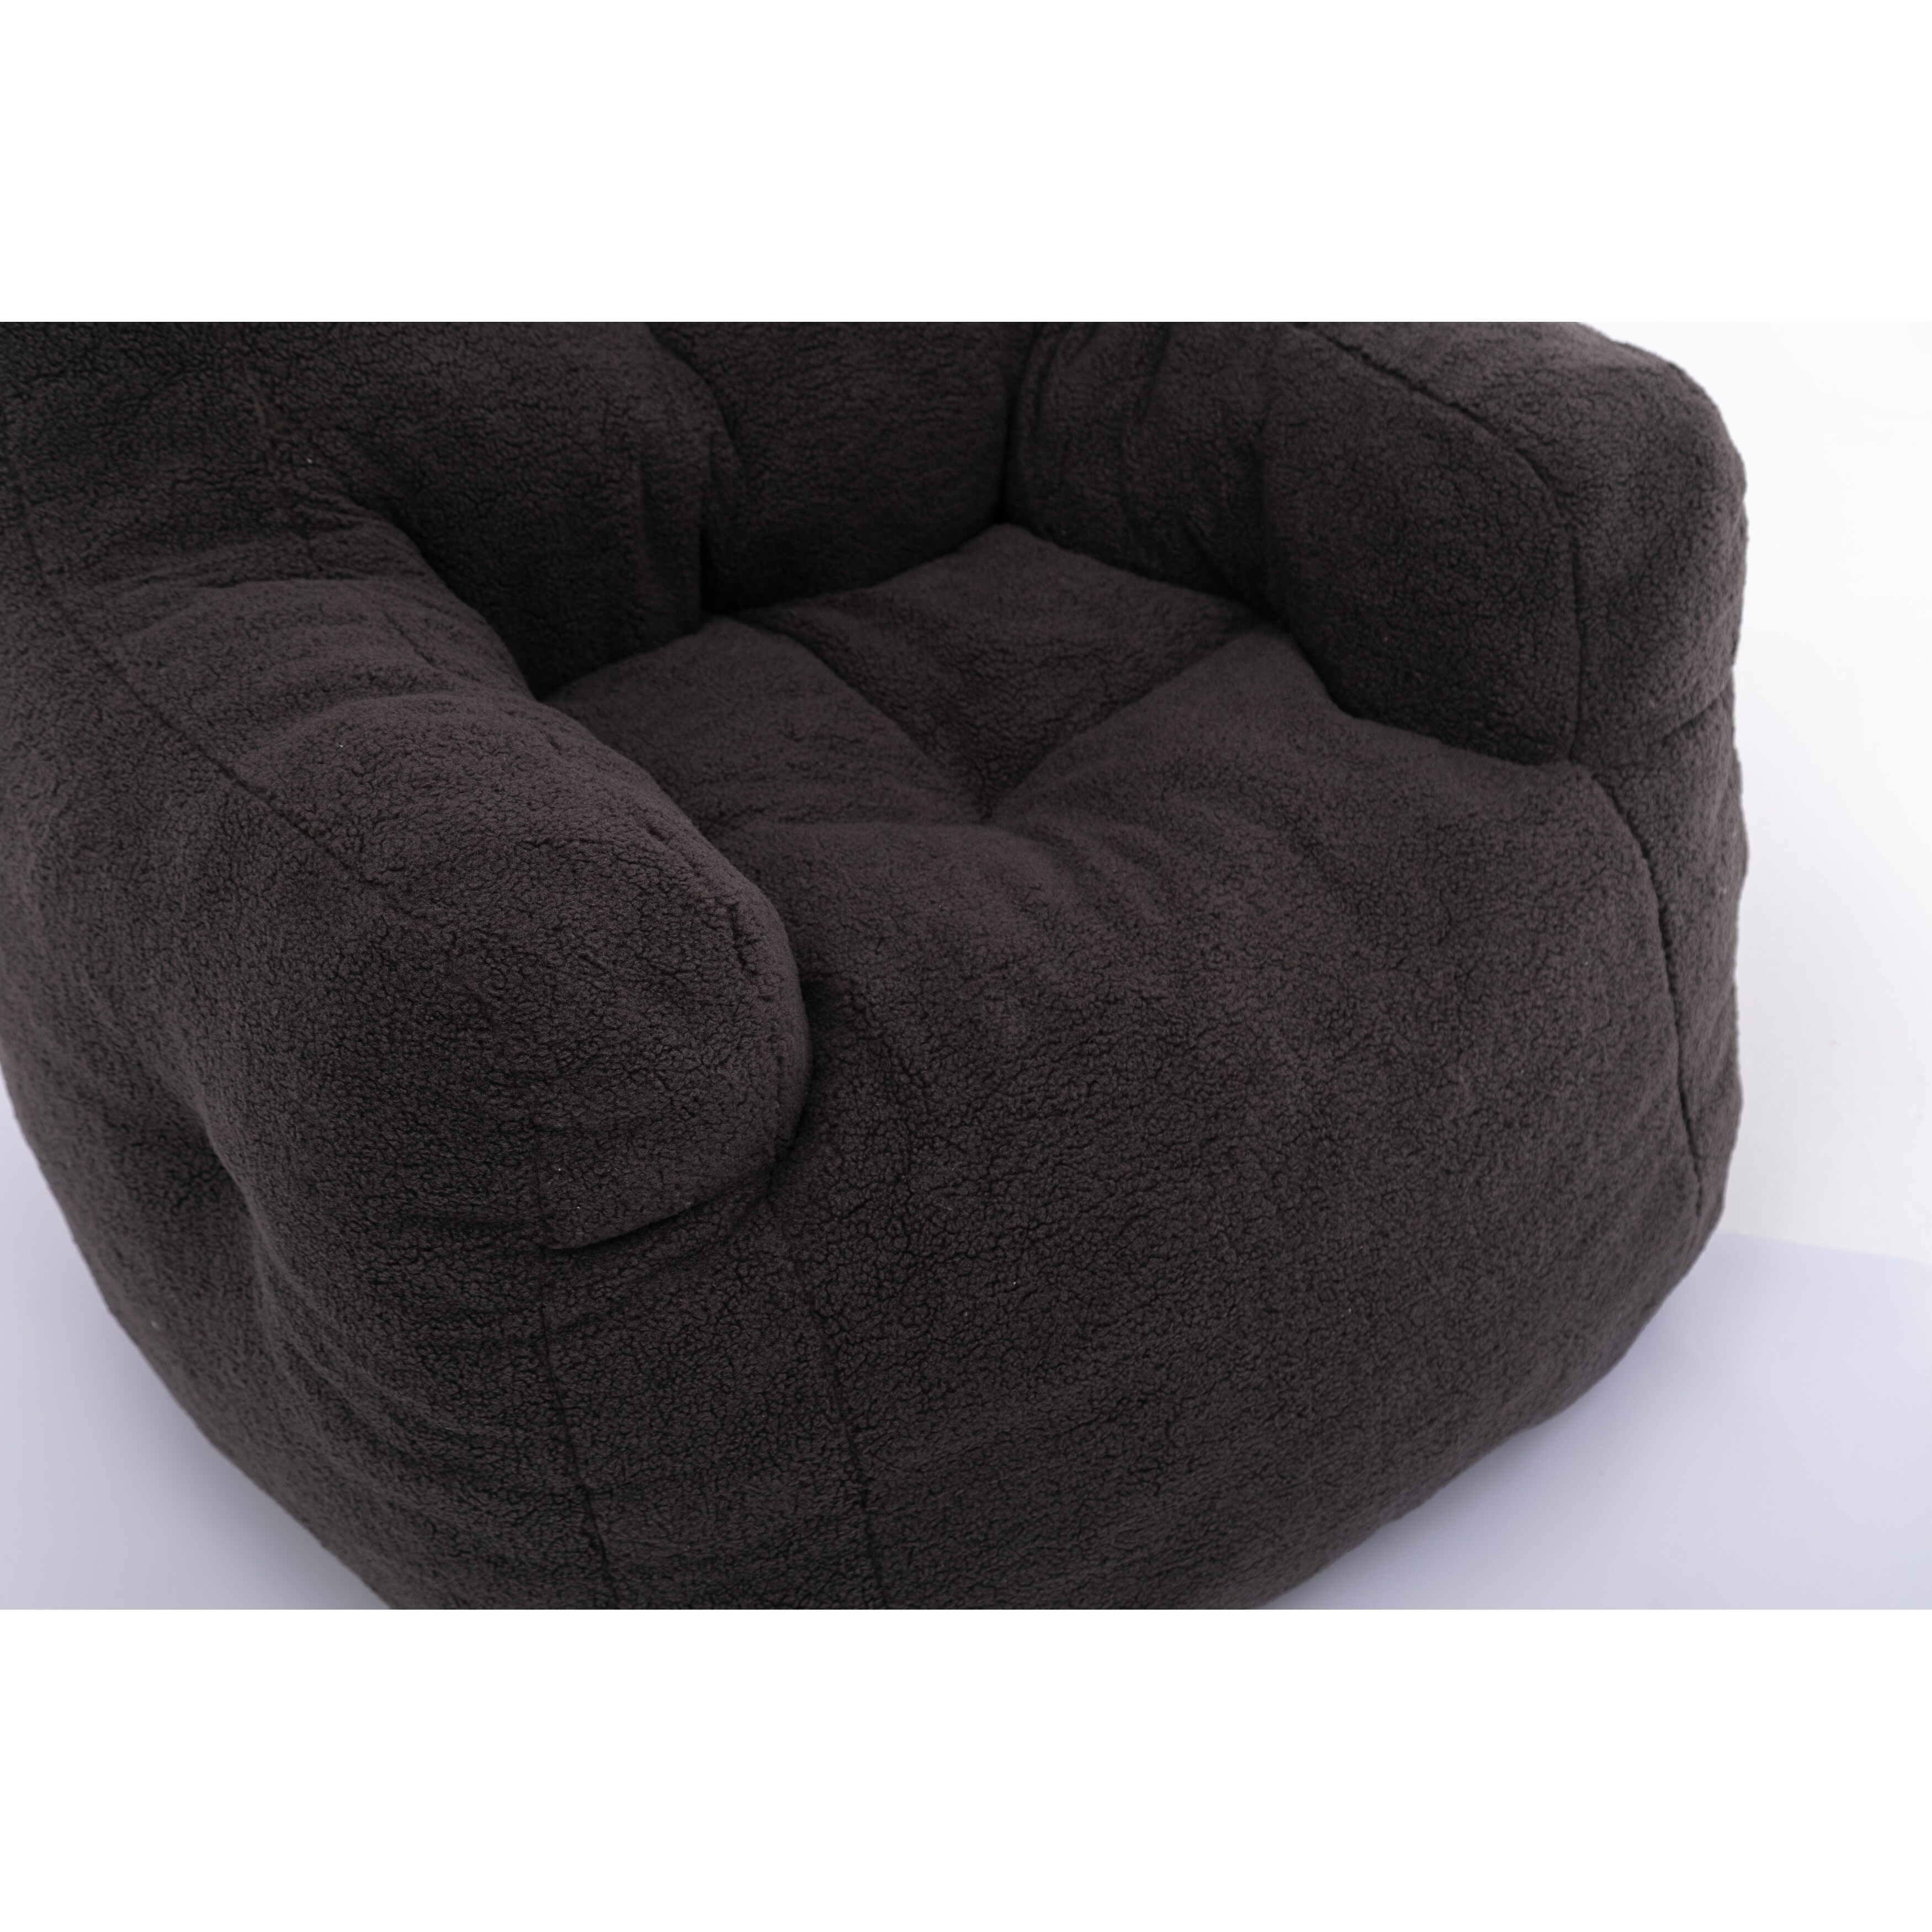 Lvory White Bean Bag Chair (27.56 in.H X 39.37 in. W X 39.37 in.D